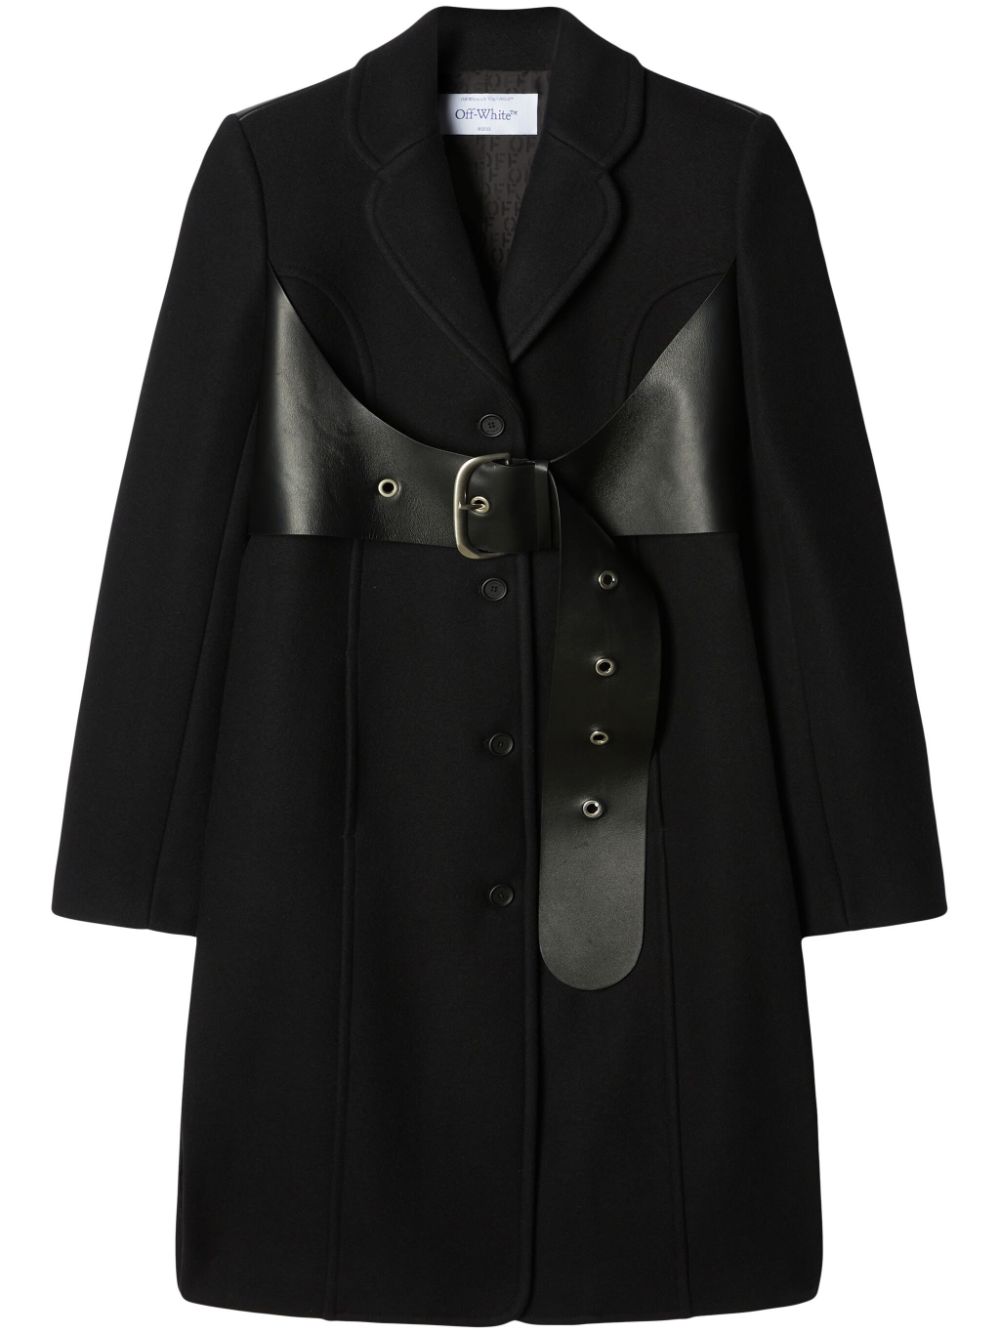 OFF-WHITE Belted Black Coat for Women in Wool Blend | FW23 Collection